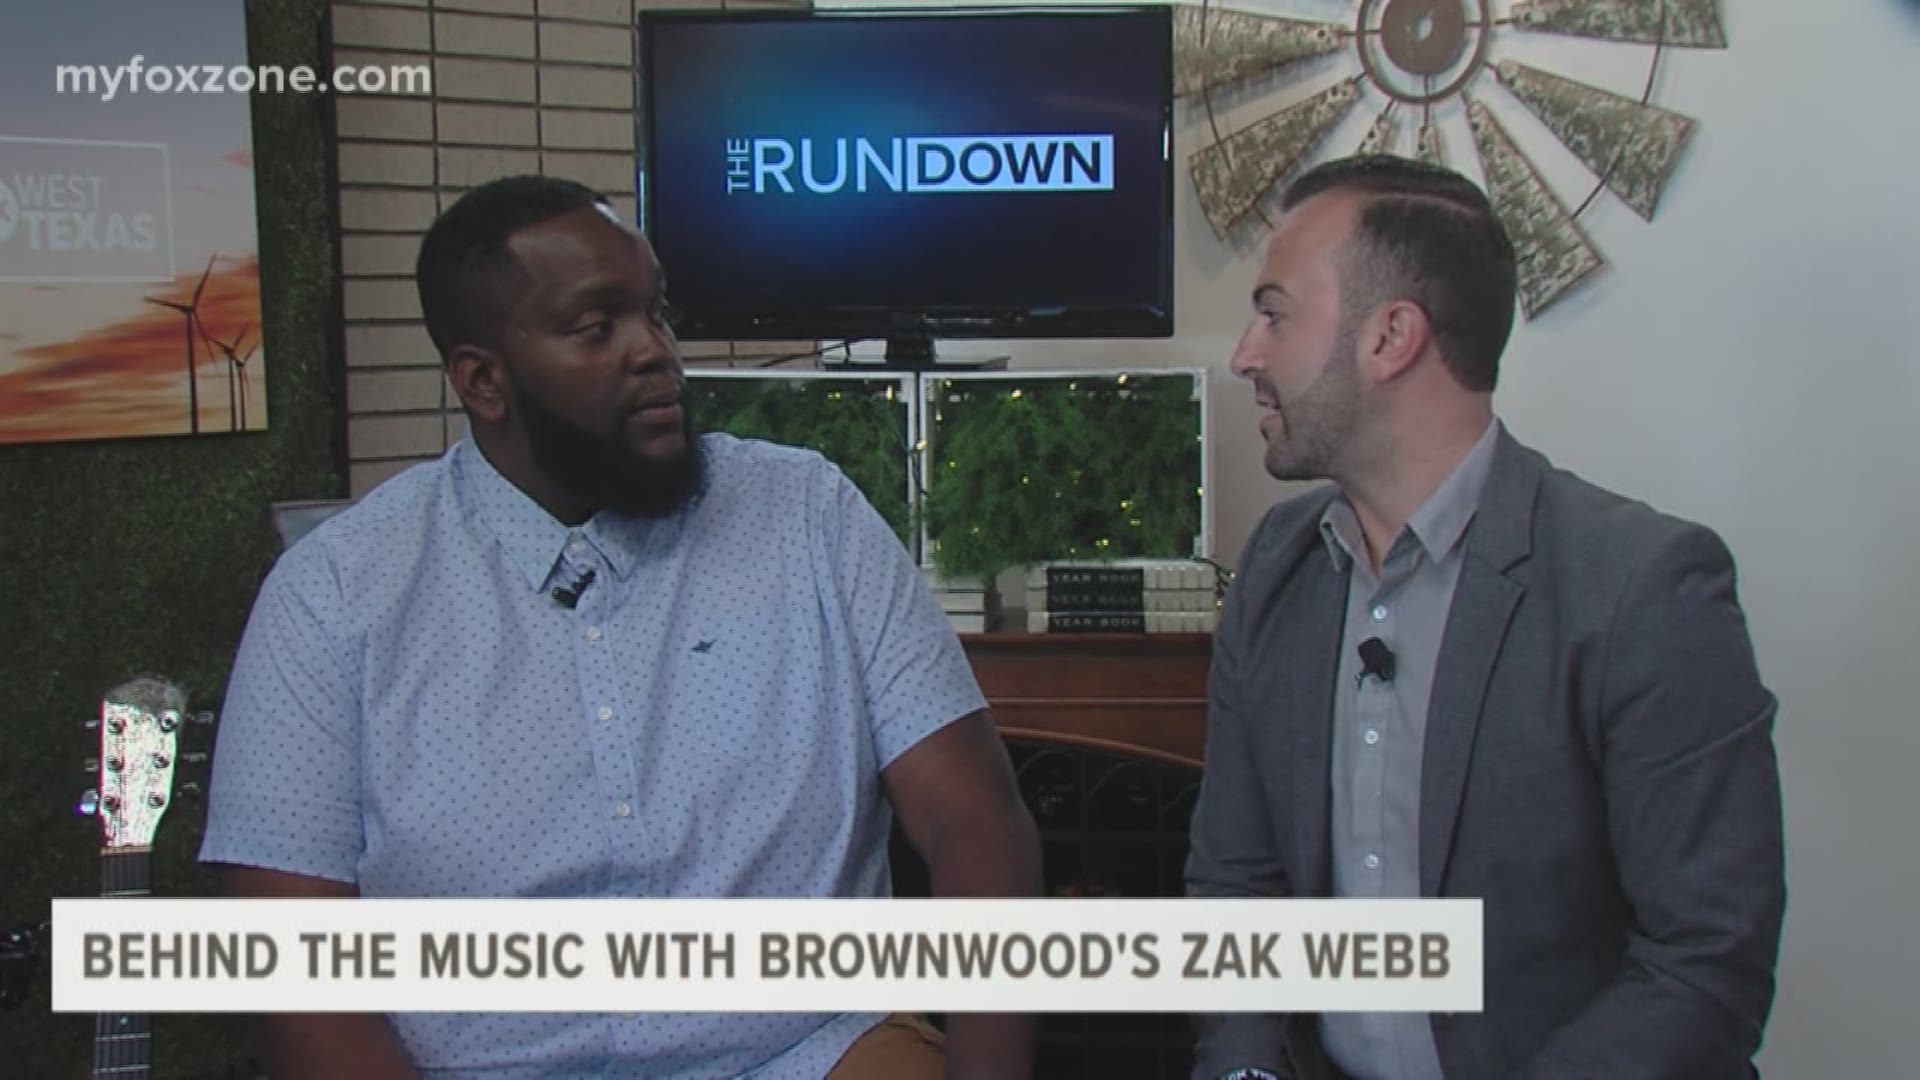 Zak Webb joins The Rundown to discuss his music and the setbacks that got him to where he is now.